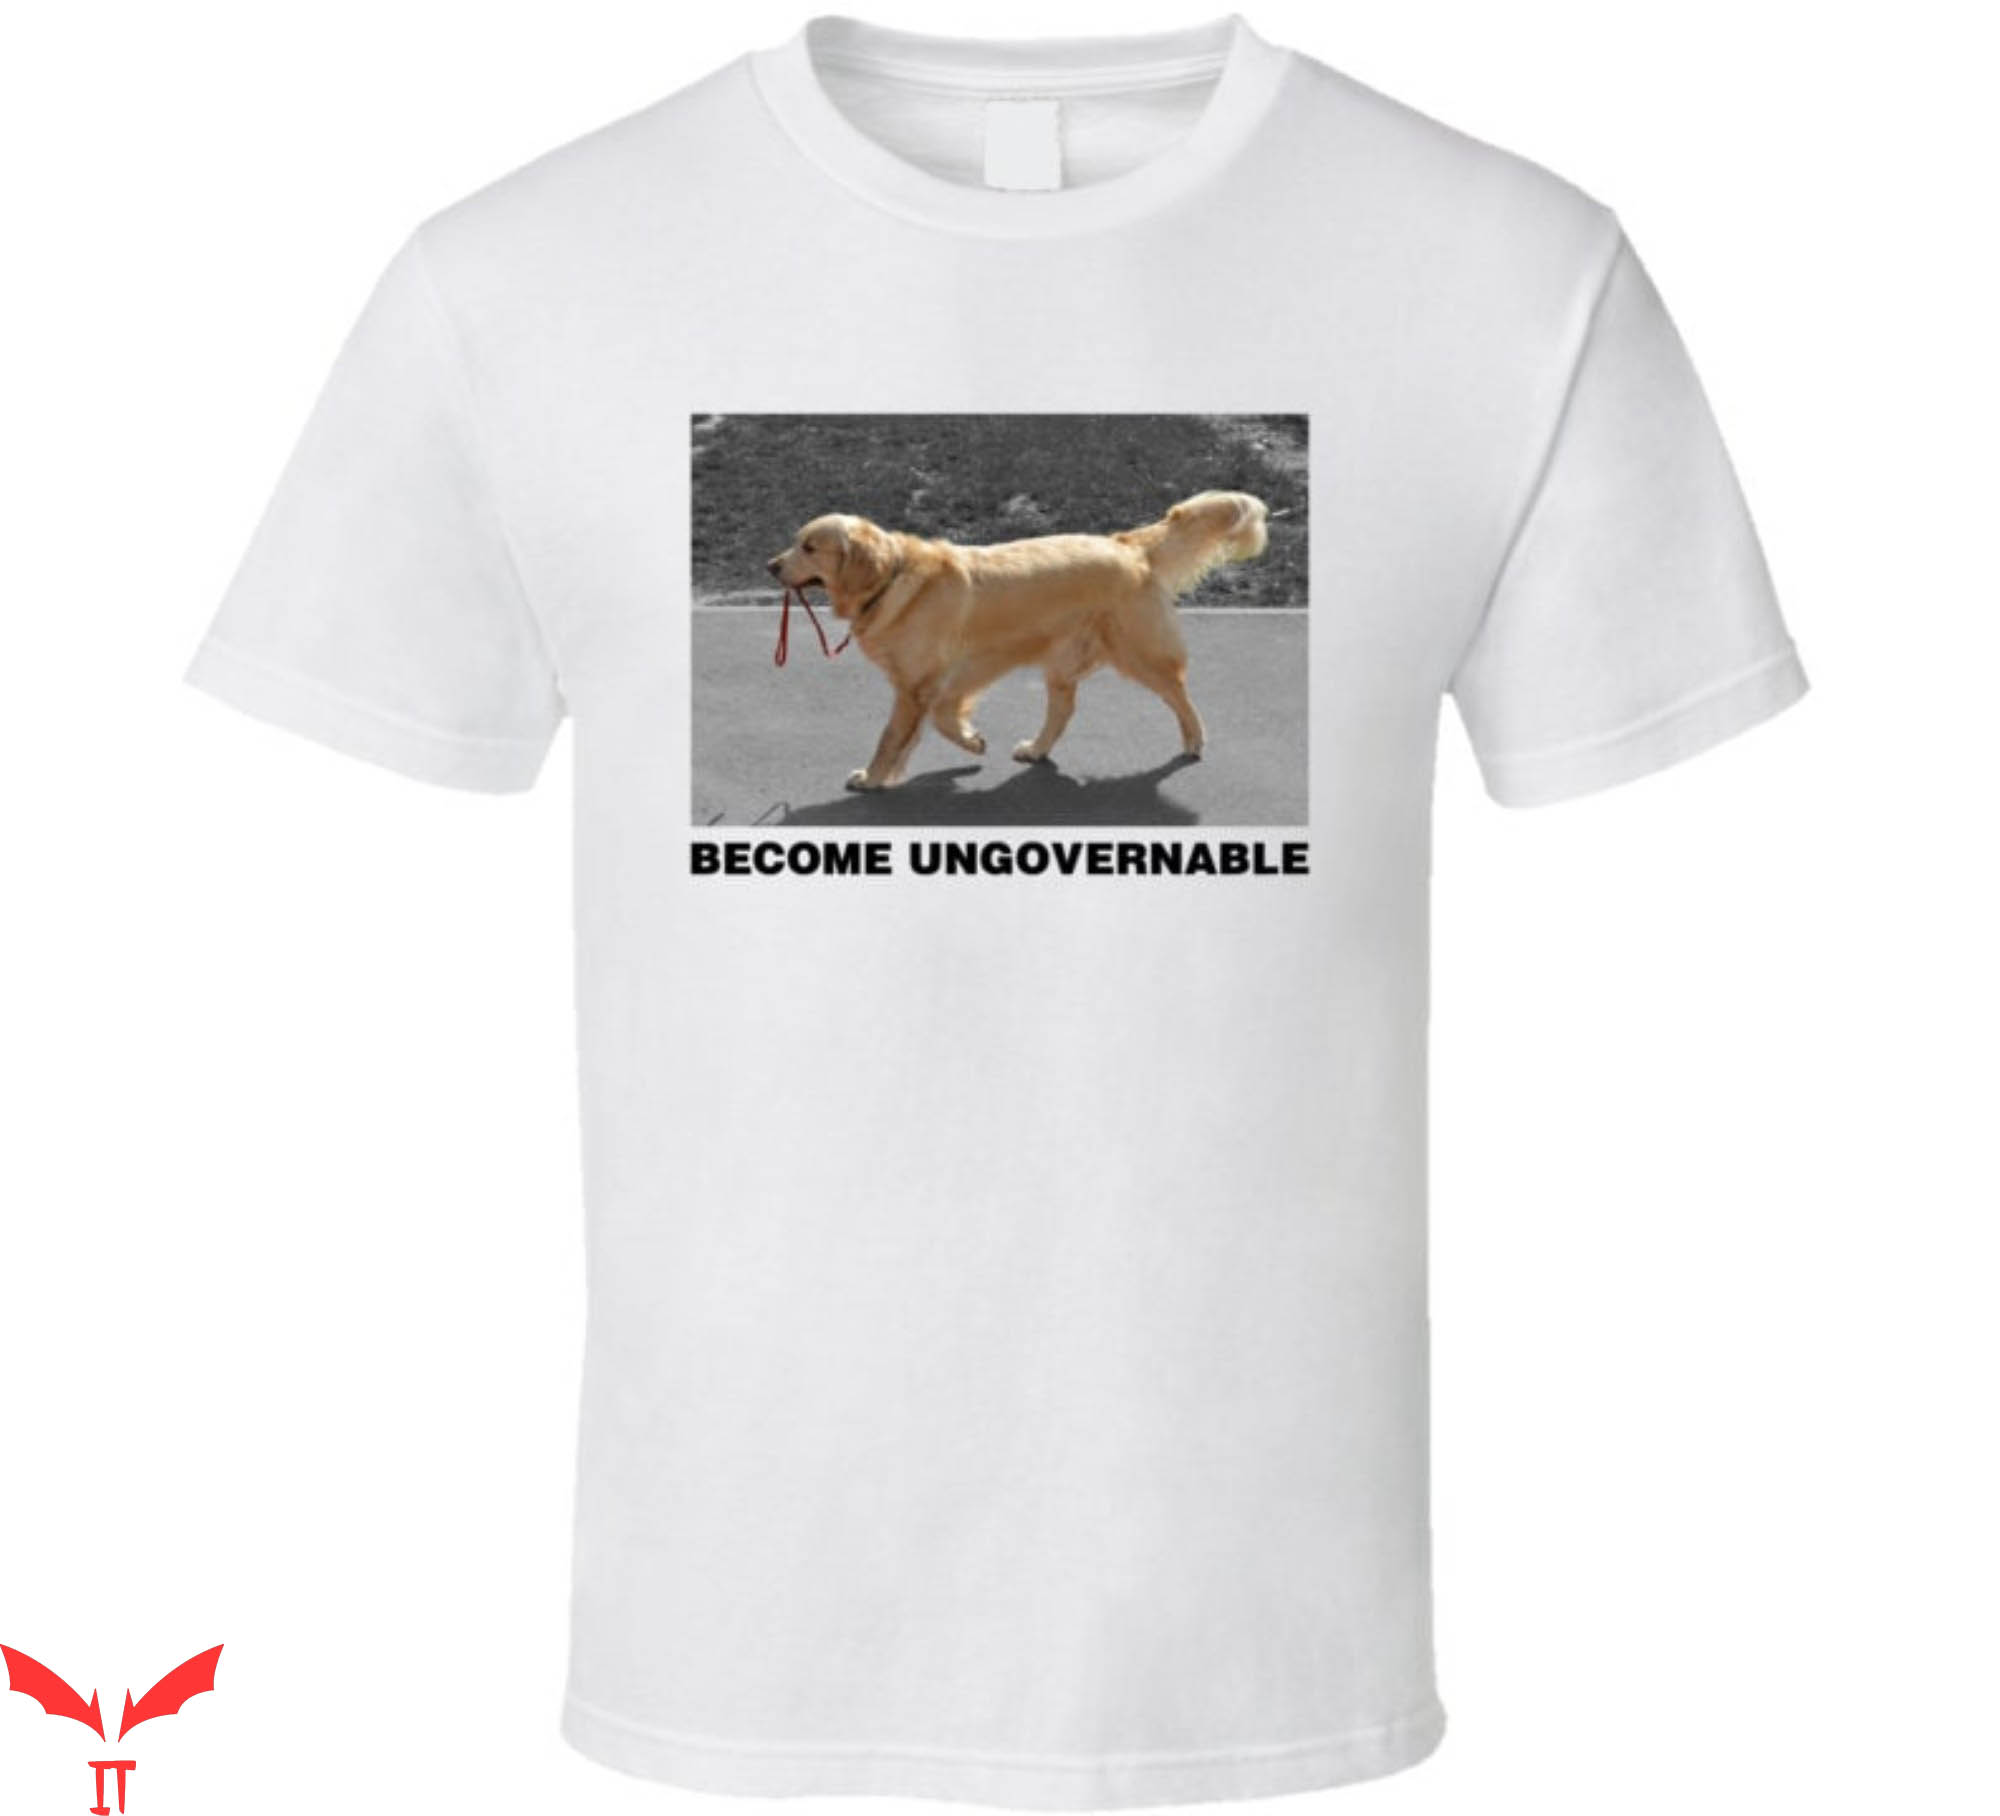 Become Ungovernable T-Shirt Funny Meme Trendy Tee Shirt